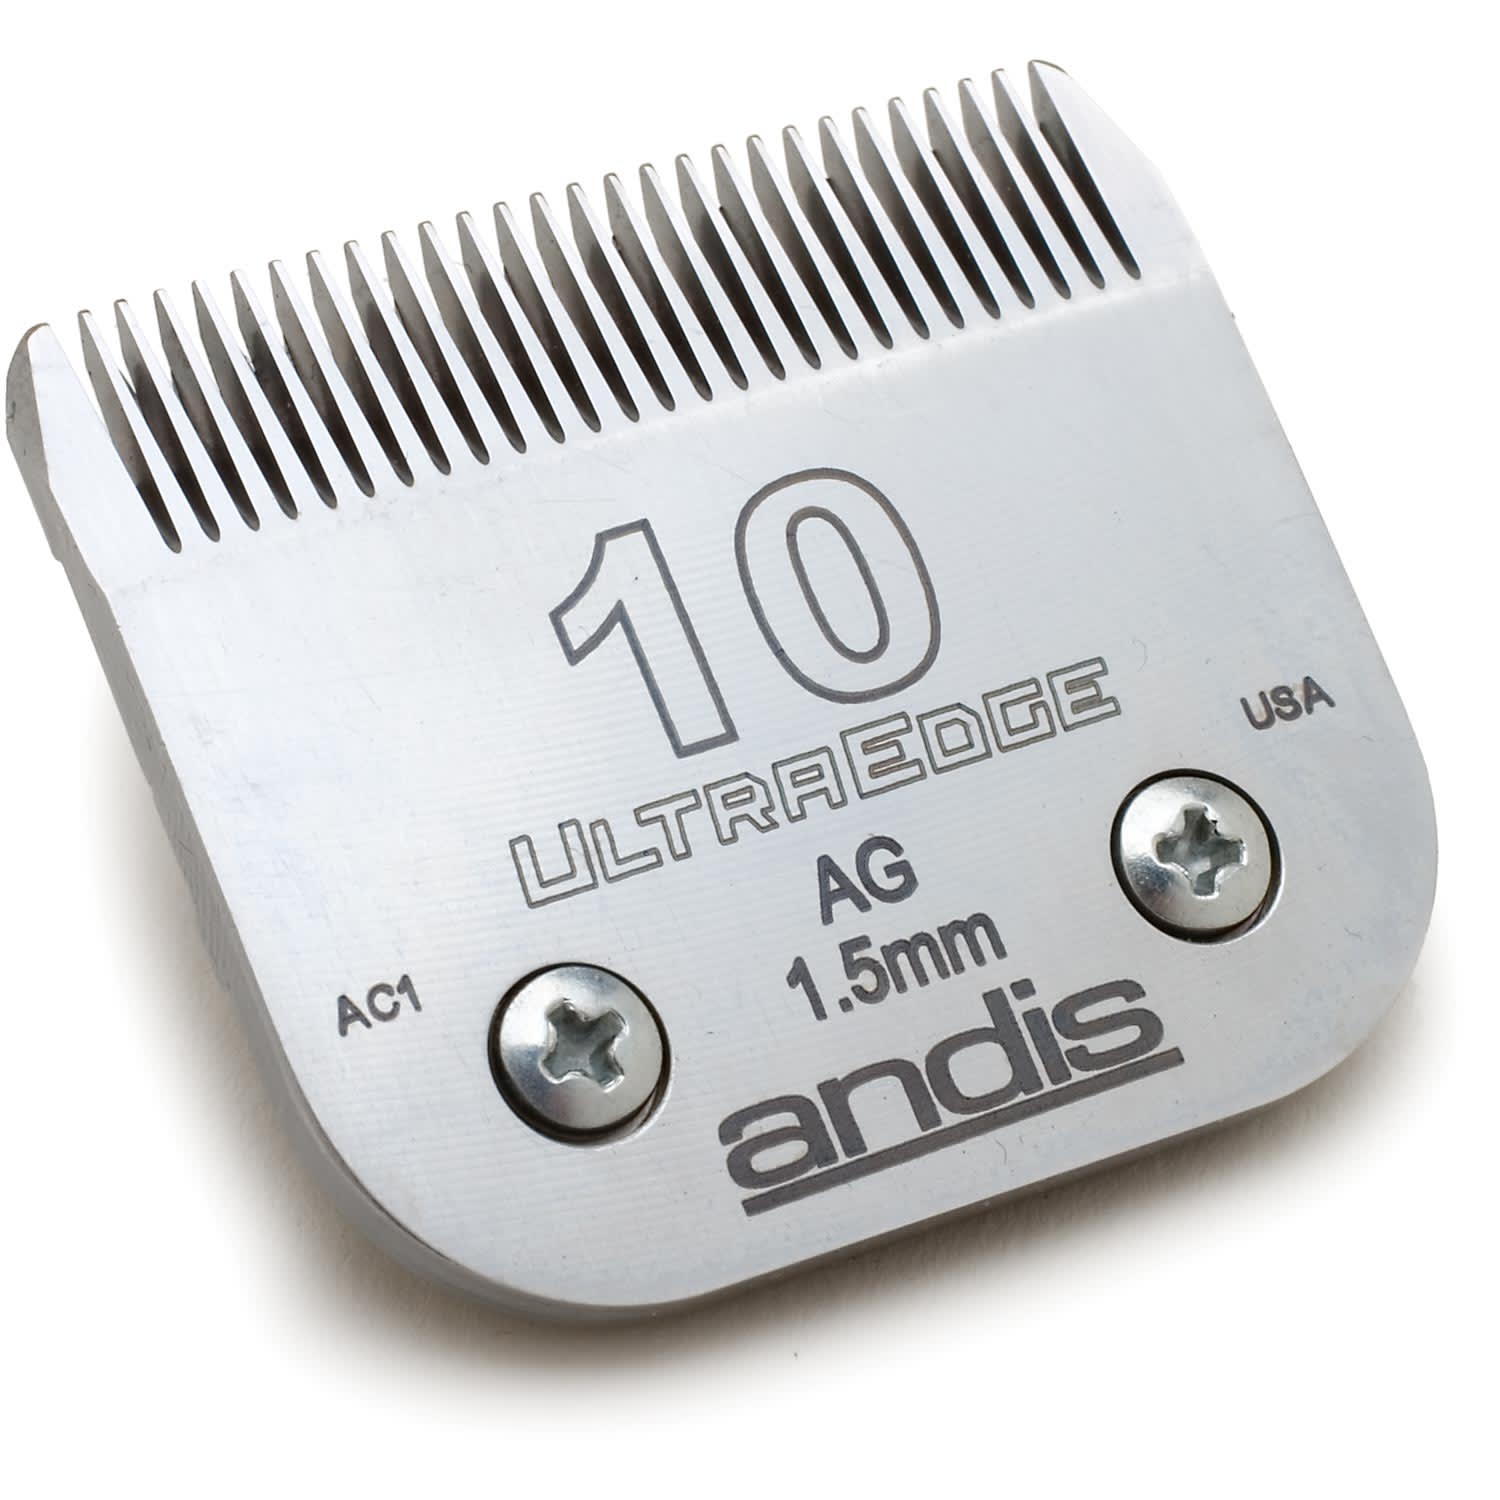 andis dog clipper blades 10